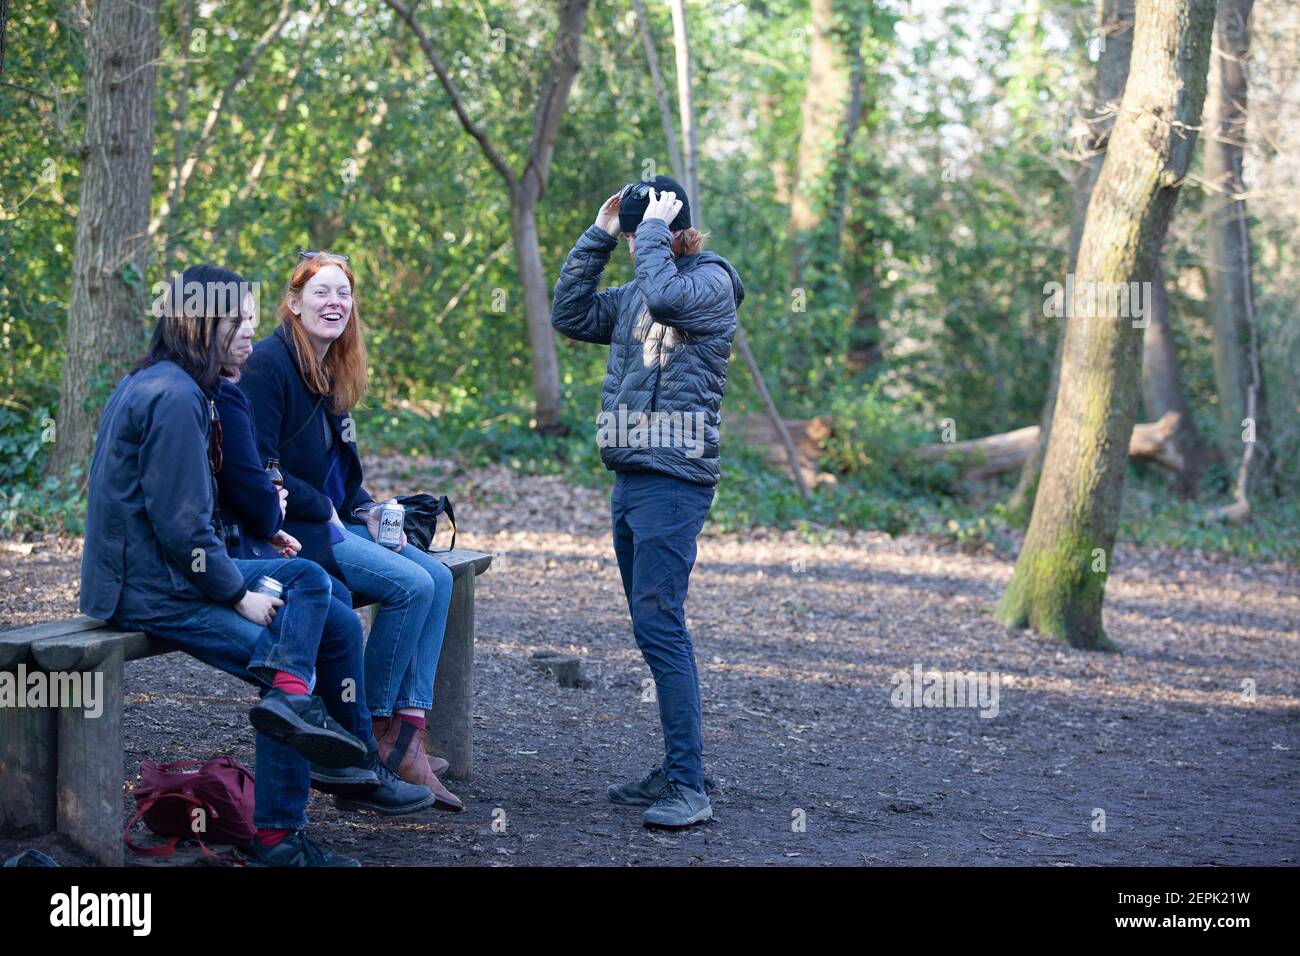 UK Weather, London, 27 February 2021: People and dogs took exercise in Dulwich wetather on a sunny afternoon, although temperatures only reached 12 centigrade. Under coronavirus lockdown regulations one individual may meet another outdoors for exercise and families may exercise within their bubbles. Anna Watson/Alamy Live News Stock Photo